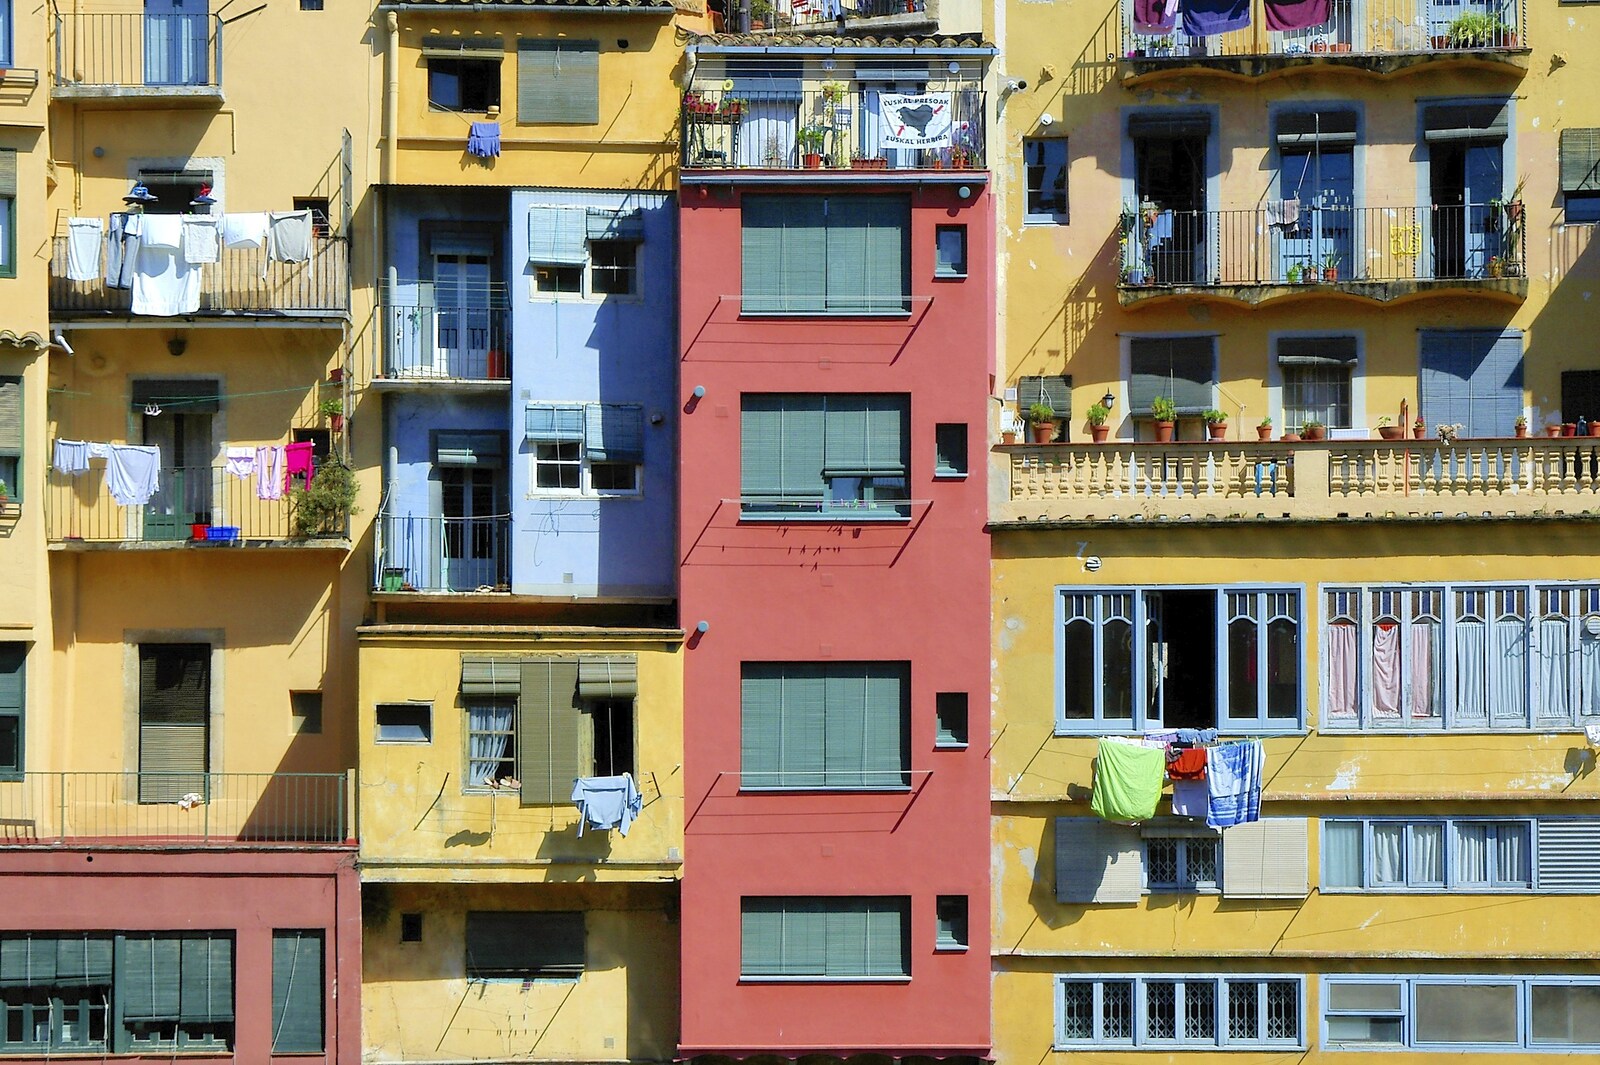 Close up detail of colourful apartments from Girona, Catalunya, Spain - 17th September 2006